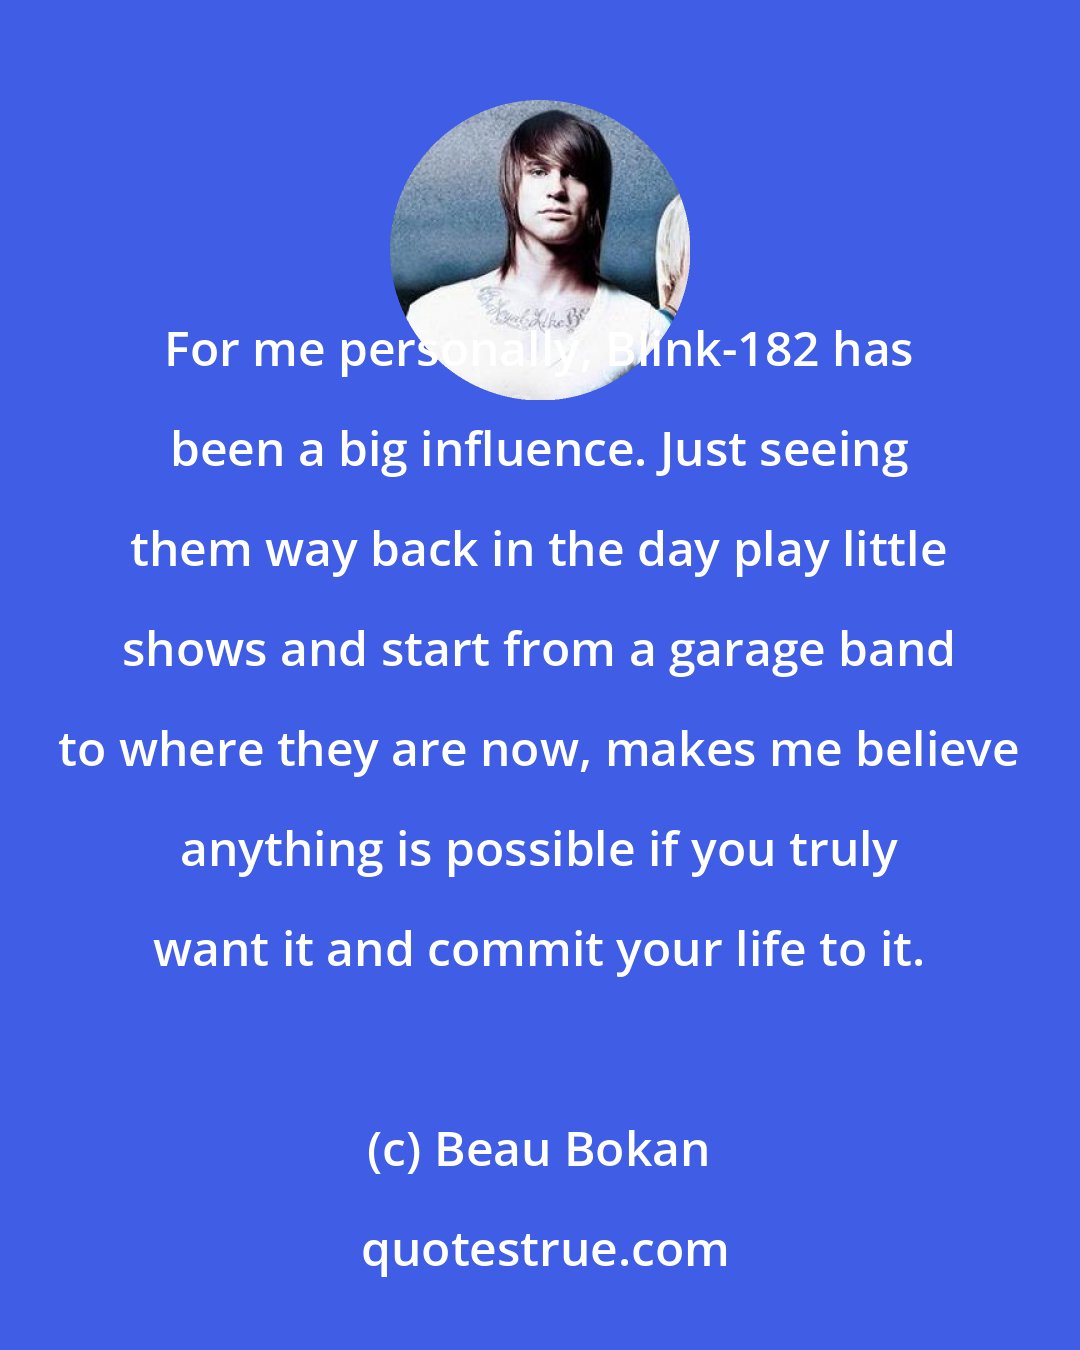 Beau Bokan: For me personally, Blink-182 has been a big influence. Just seeing them way back in the day play little shows and start from a garage band to where they are now, makes me believe anything is possible if you truly want it and commit your life to it.